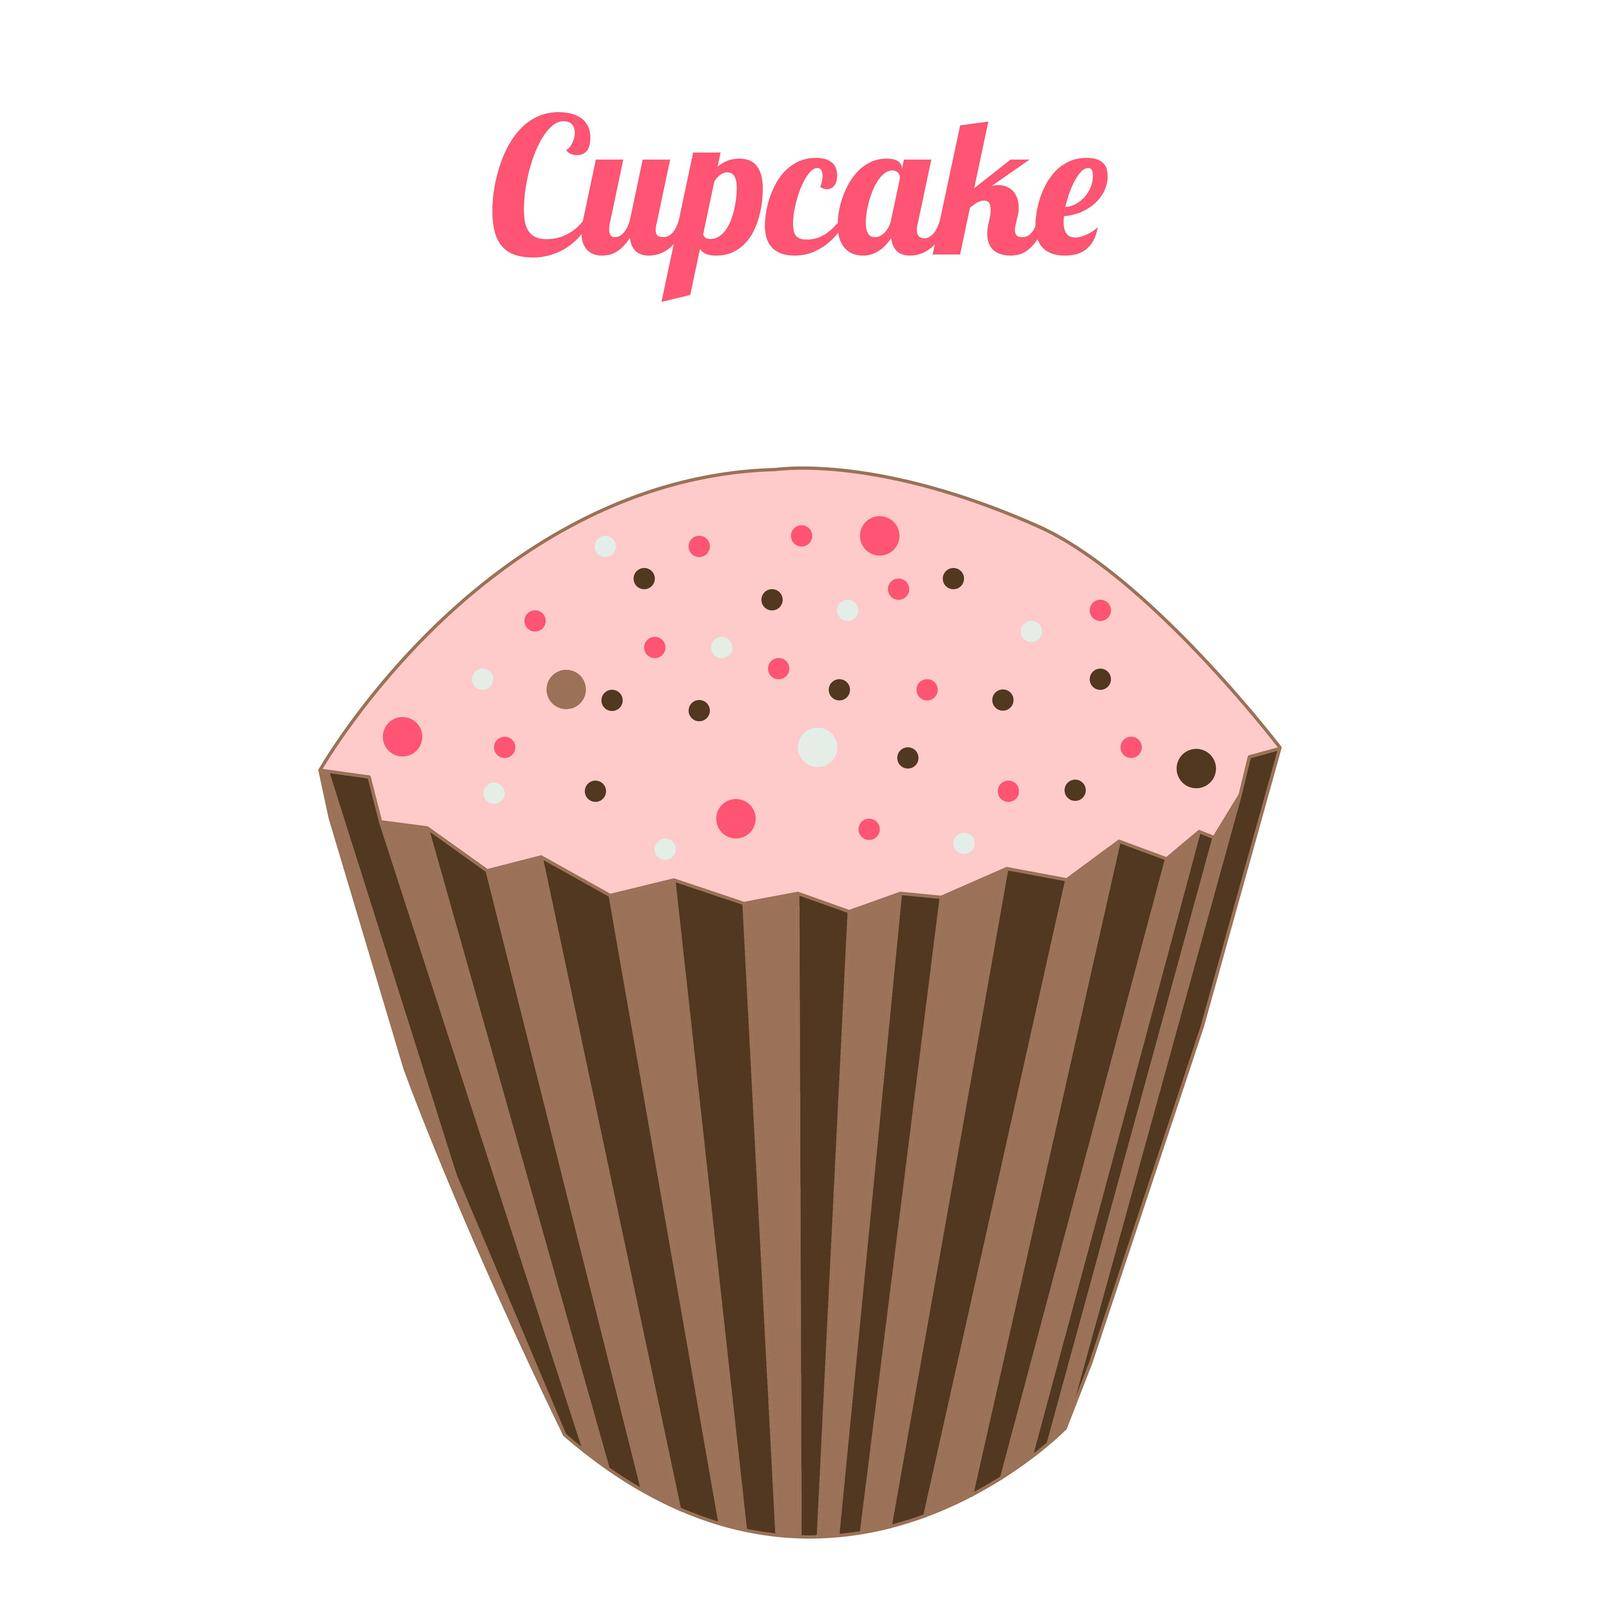 rose cupcake with crumbles in vector